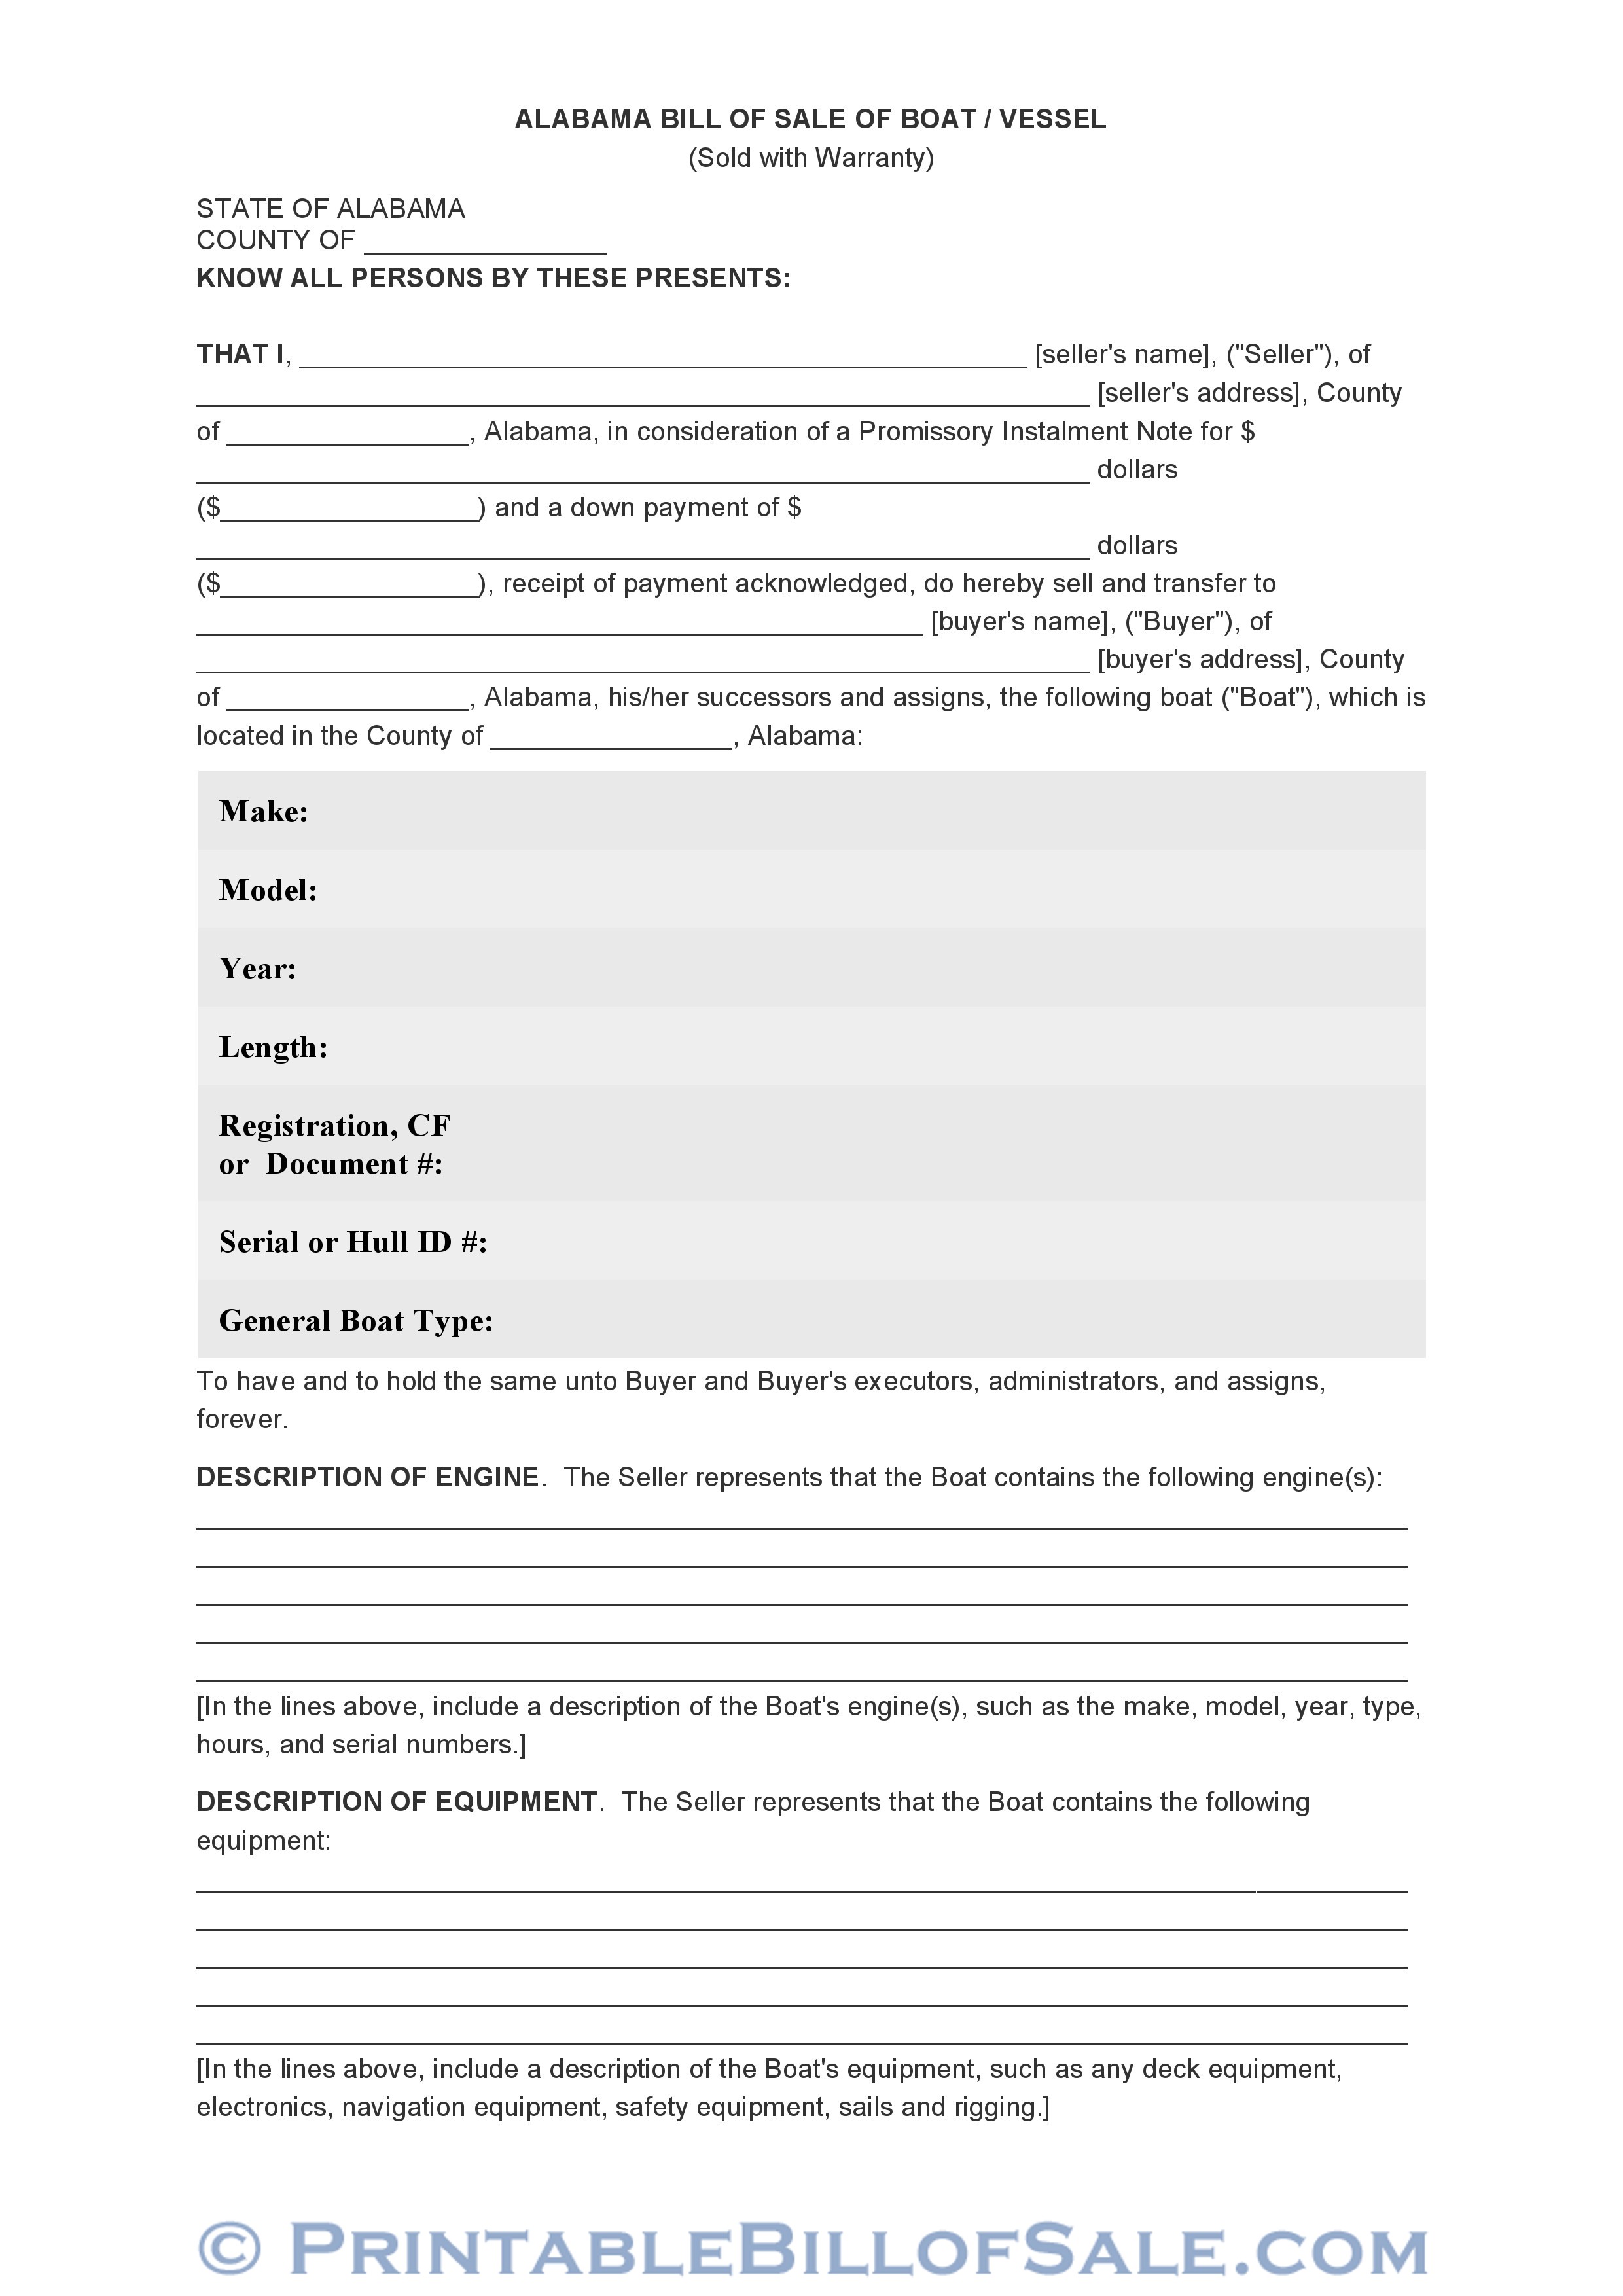 Free Alabama Bill Of Sale Of Boat Vessel Form Download Pdf Word Template